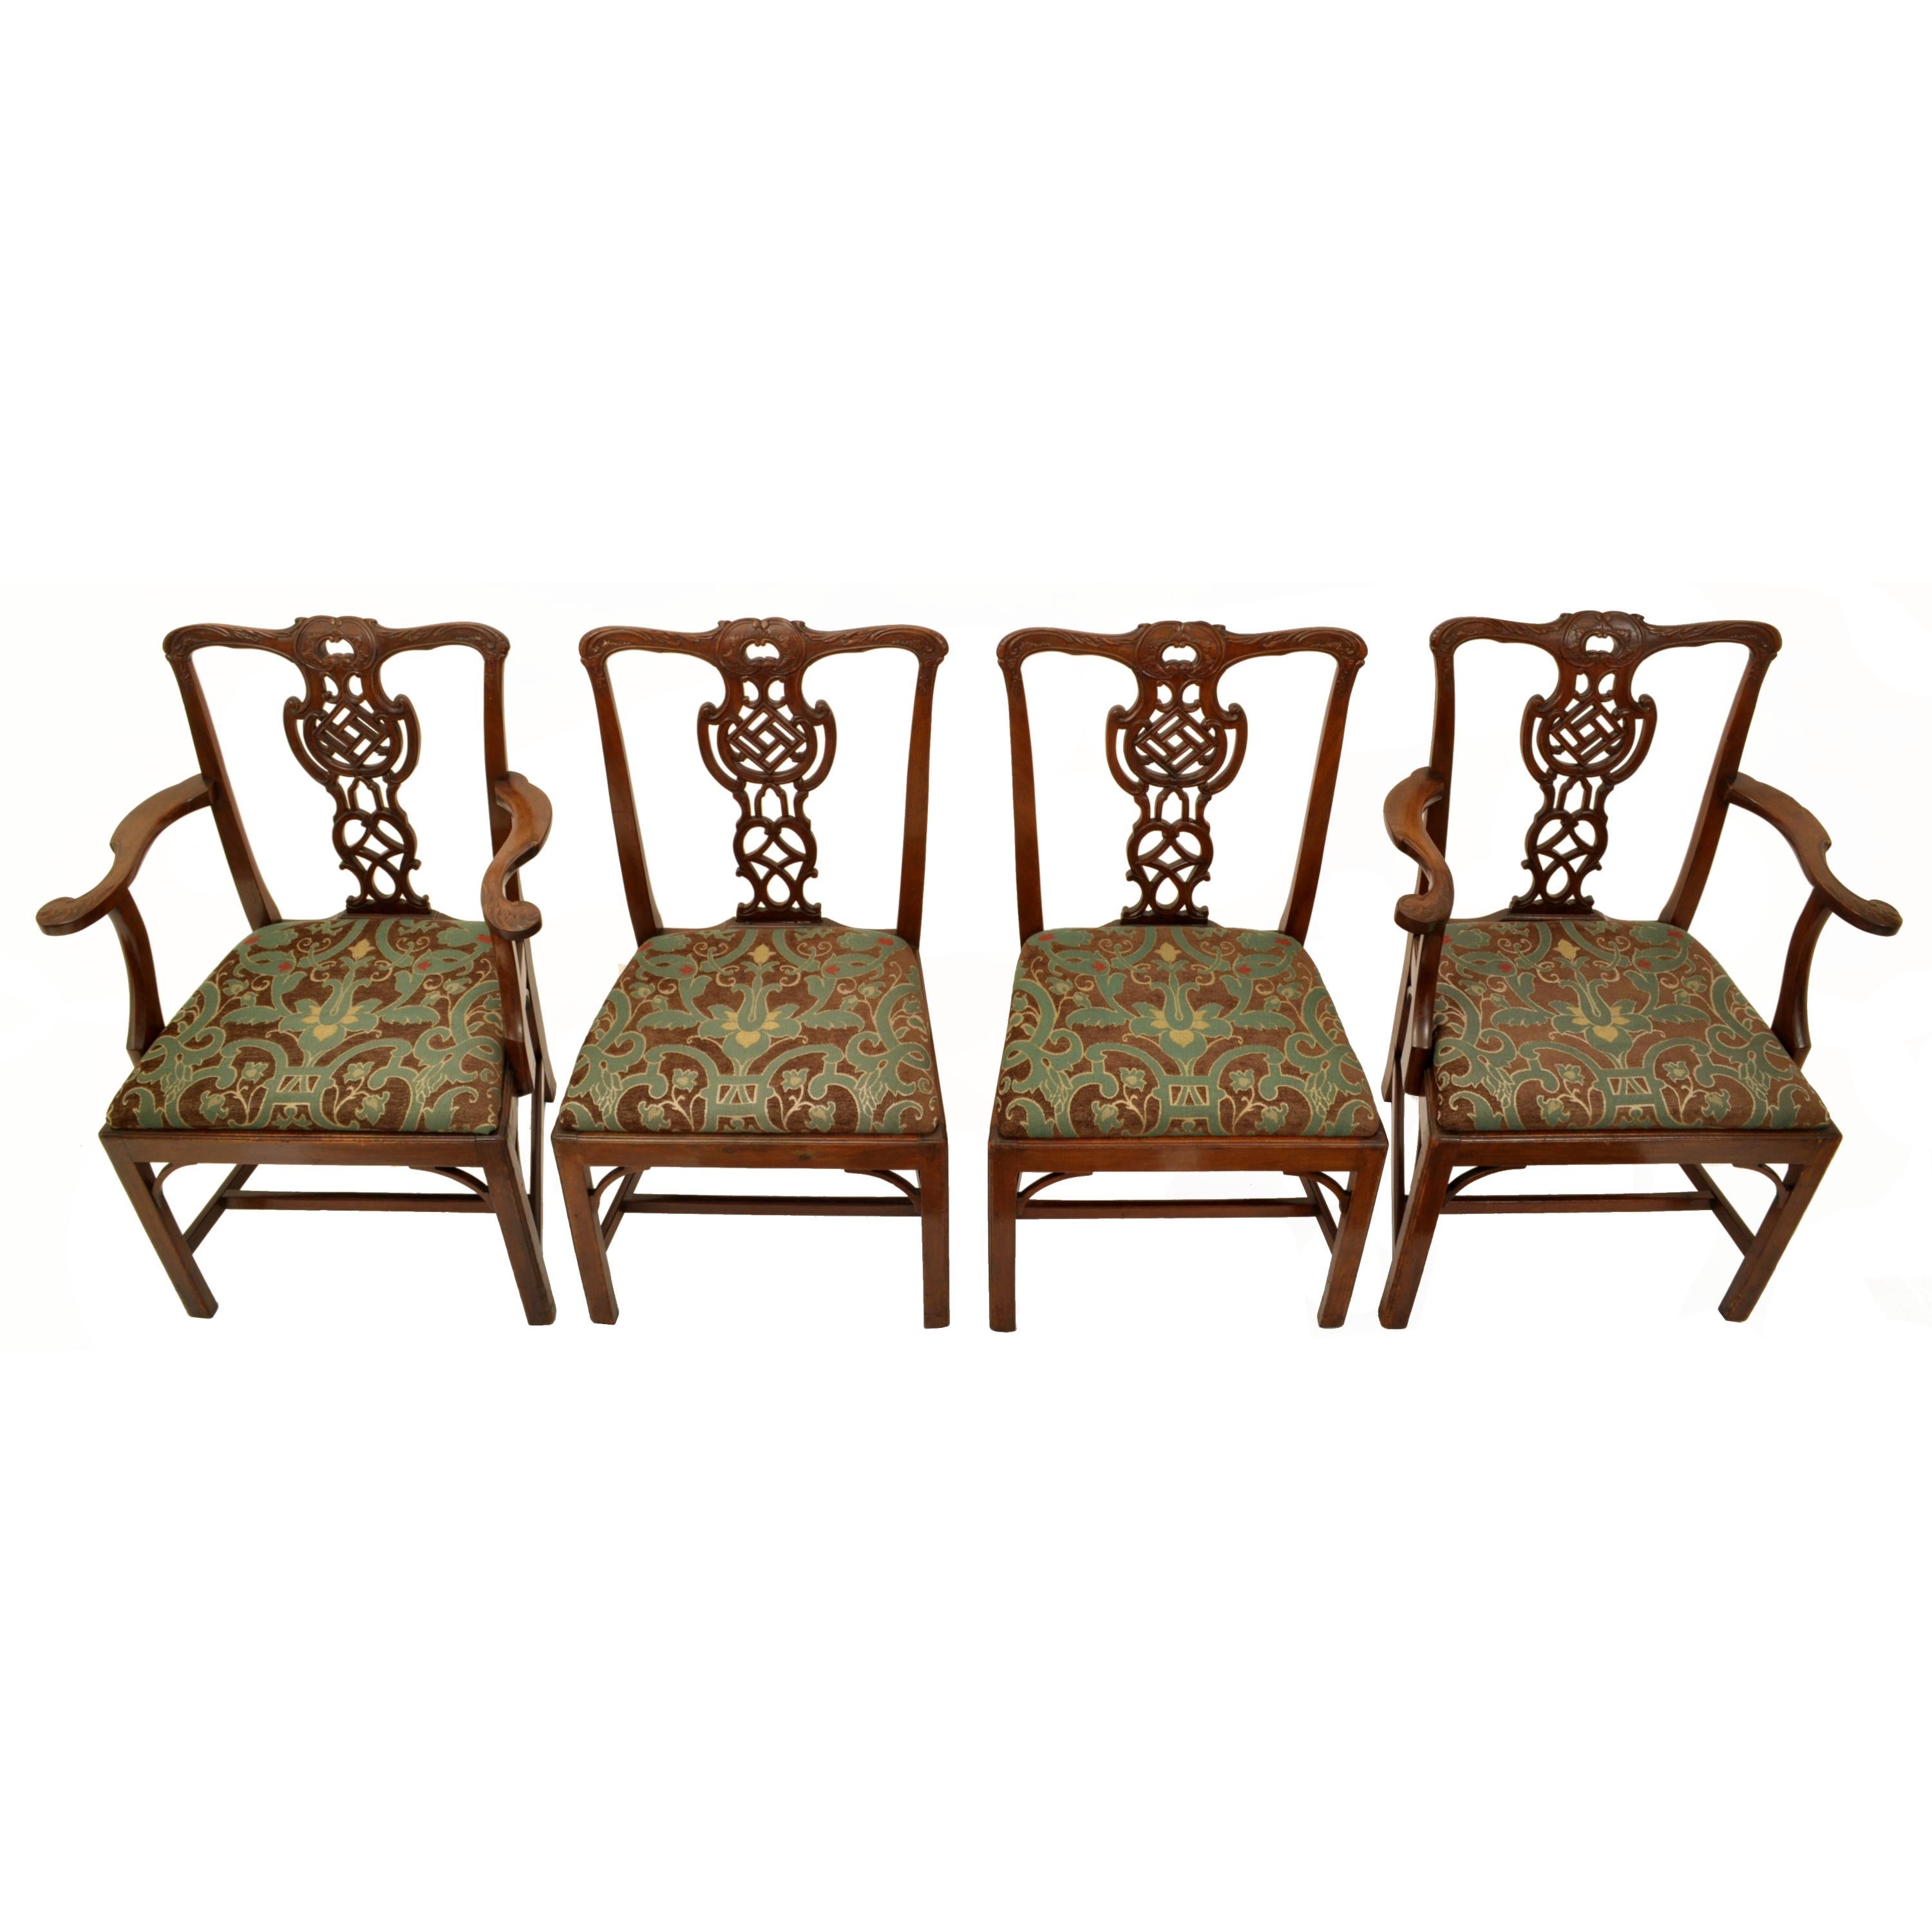 Antique 19th Century Set of Four Carved Mahogany Chippendale Dining Chairs 1890 In Good Condition For Sale In Portland, OR